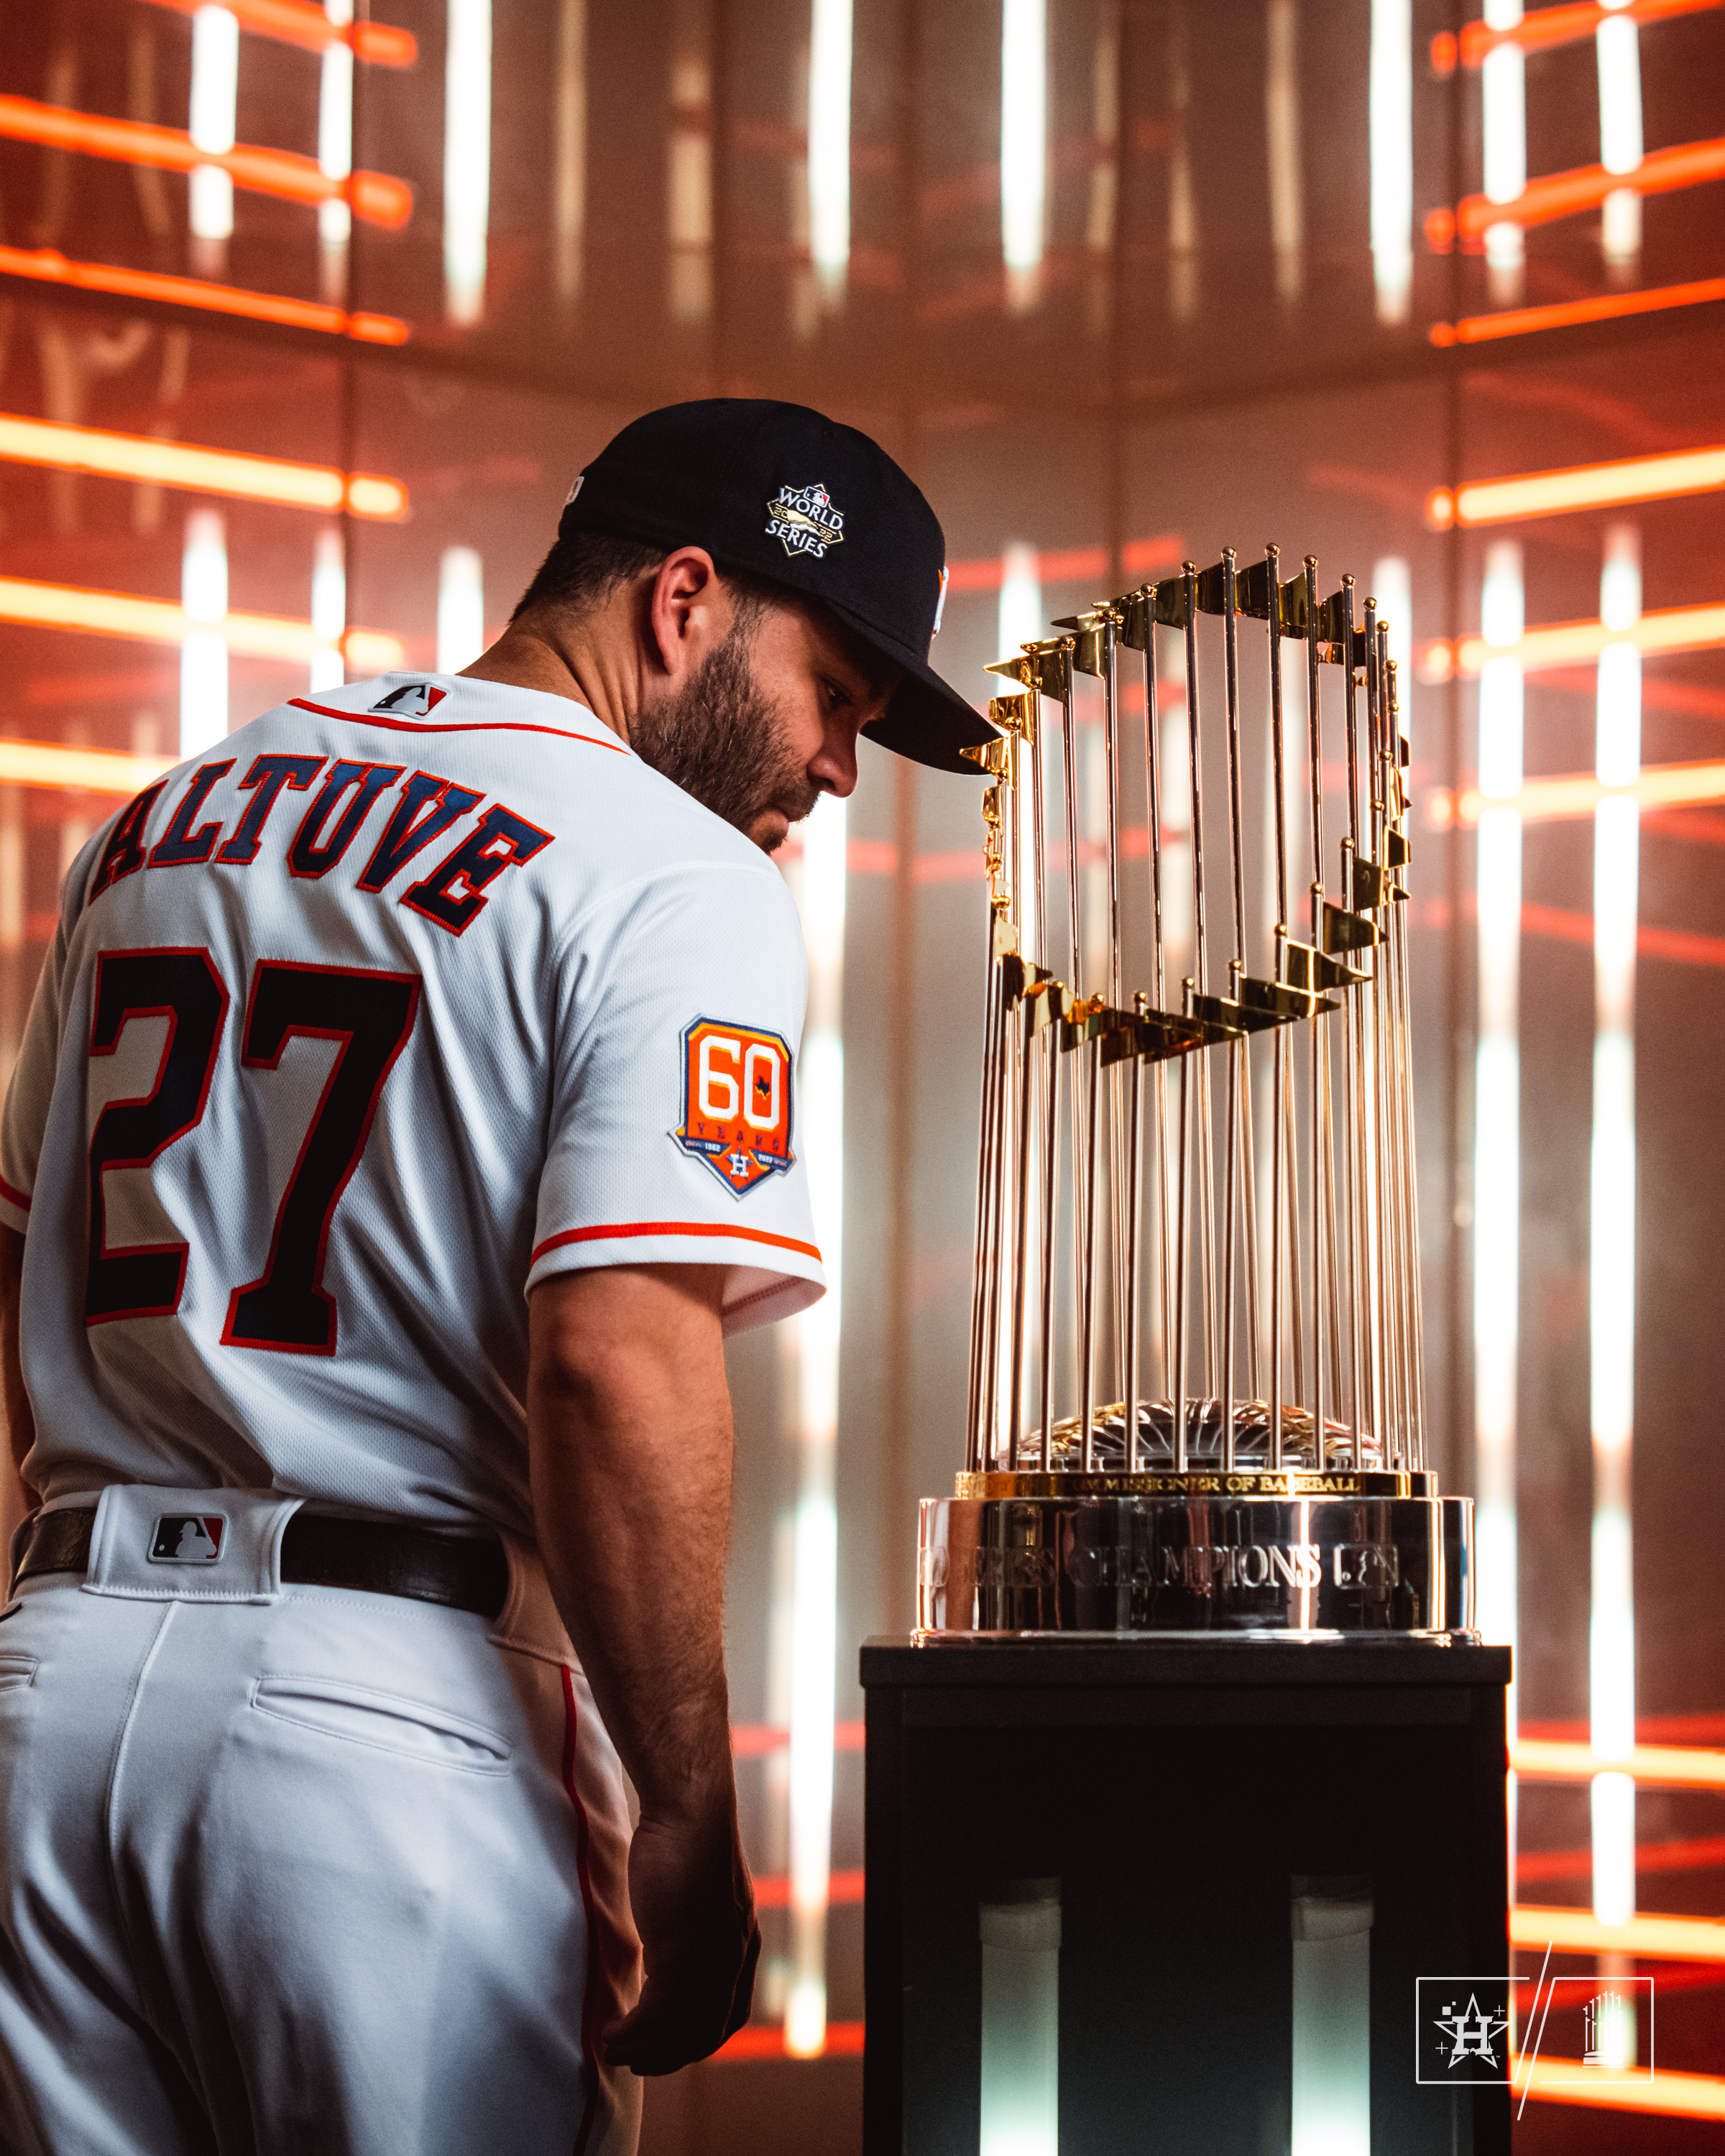 More throwbacks courtesy of the Astros twitter account : r/Astros